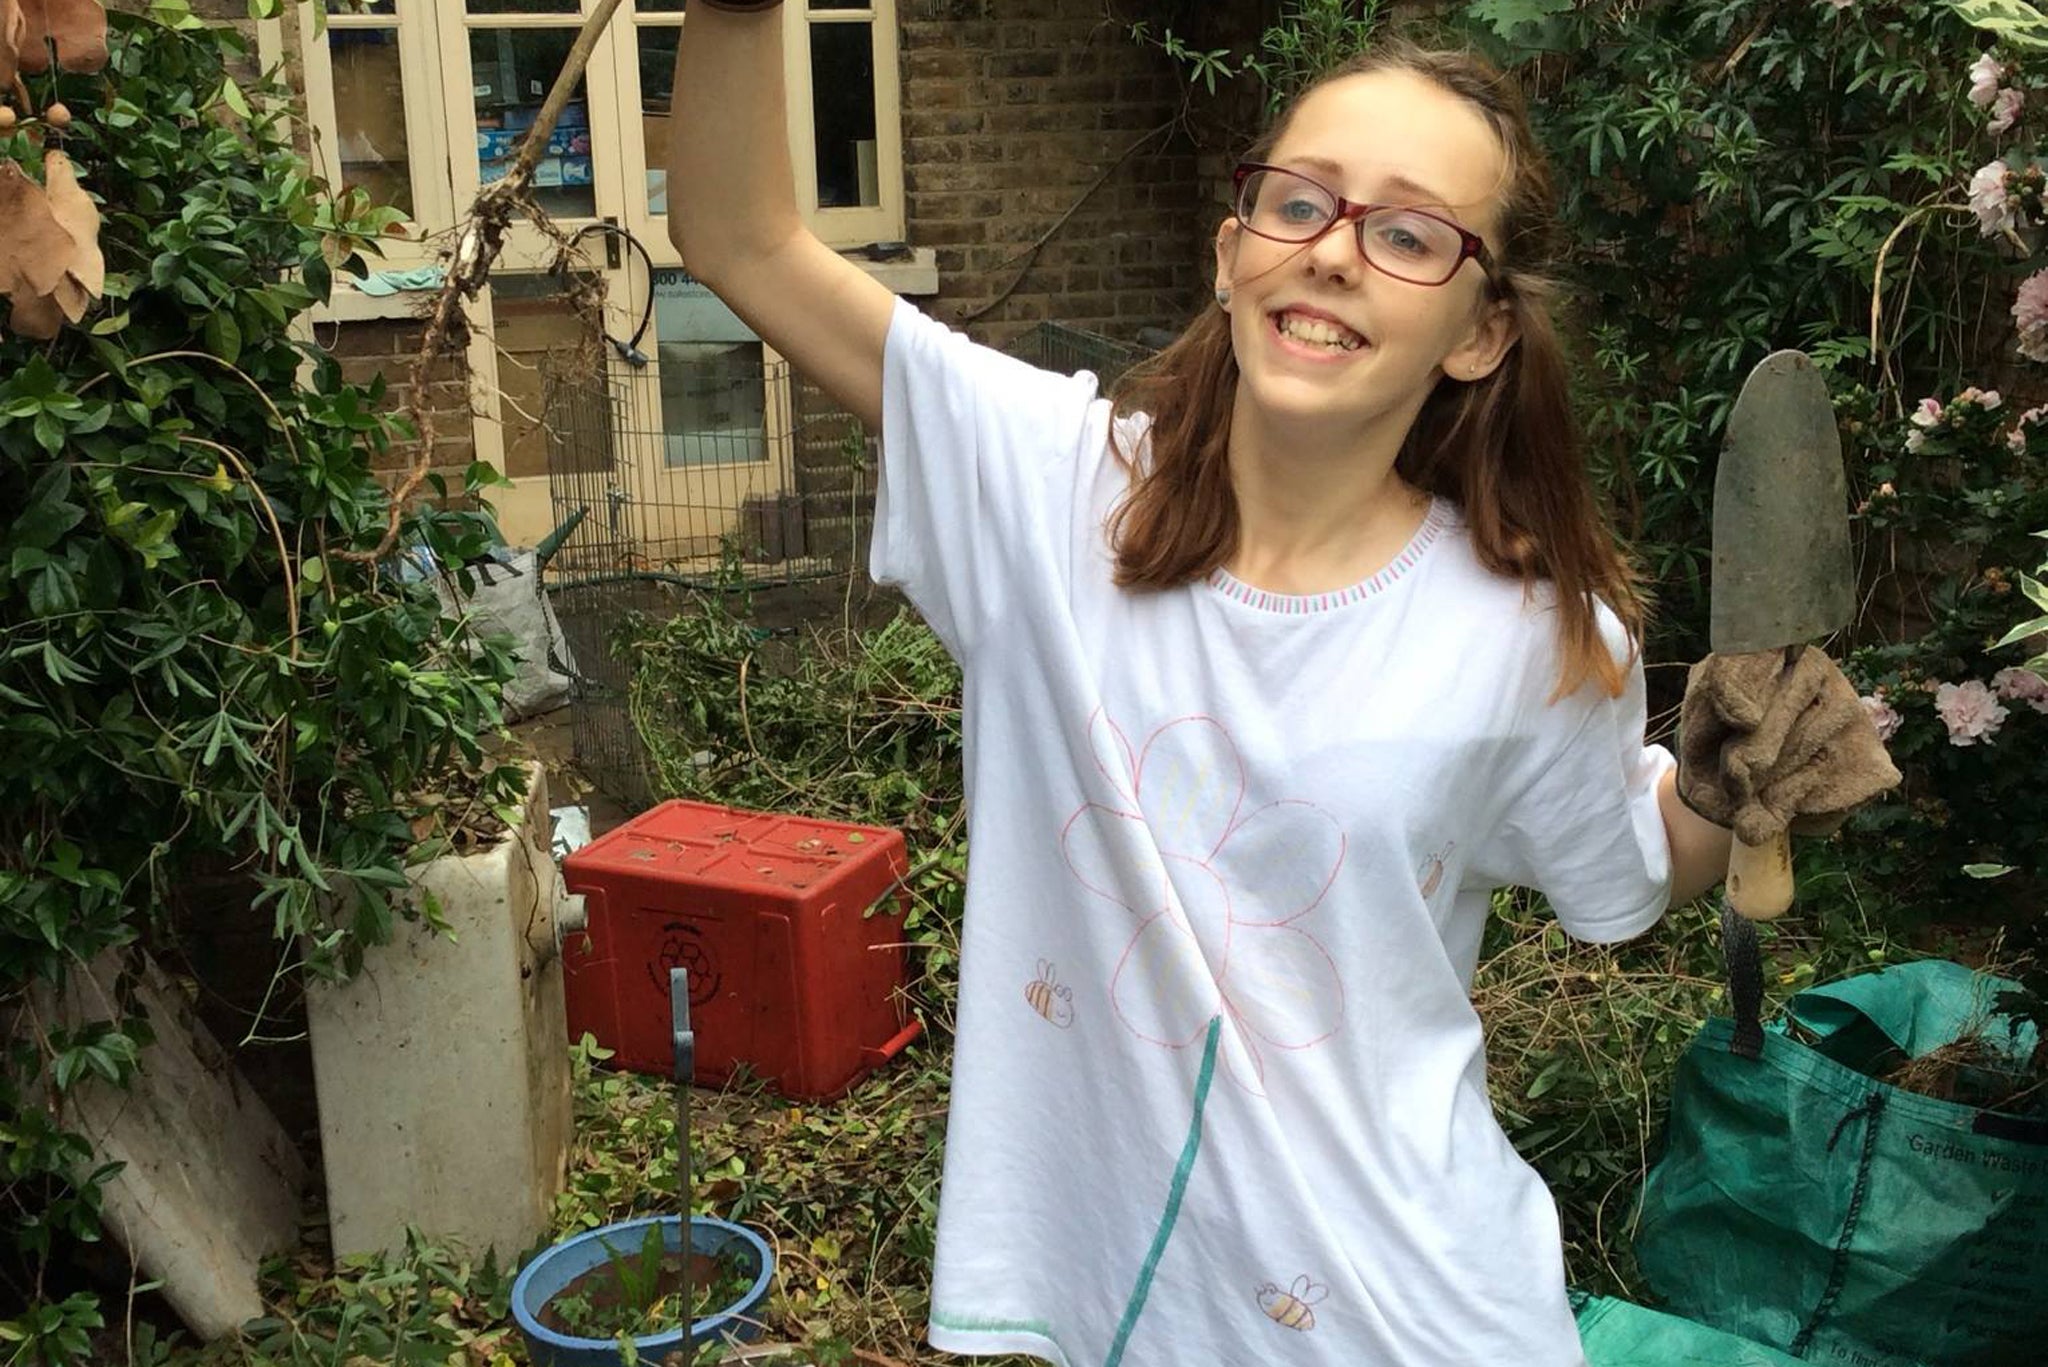 Alice Gross, 14, has been missing for just over two weeks